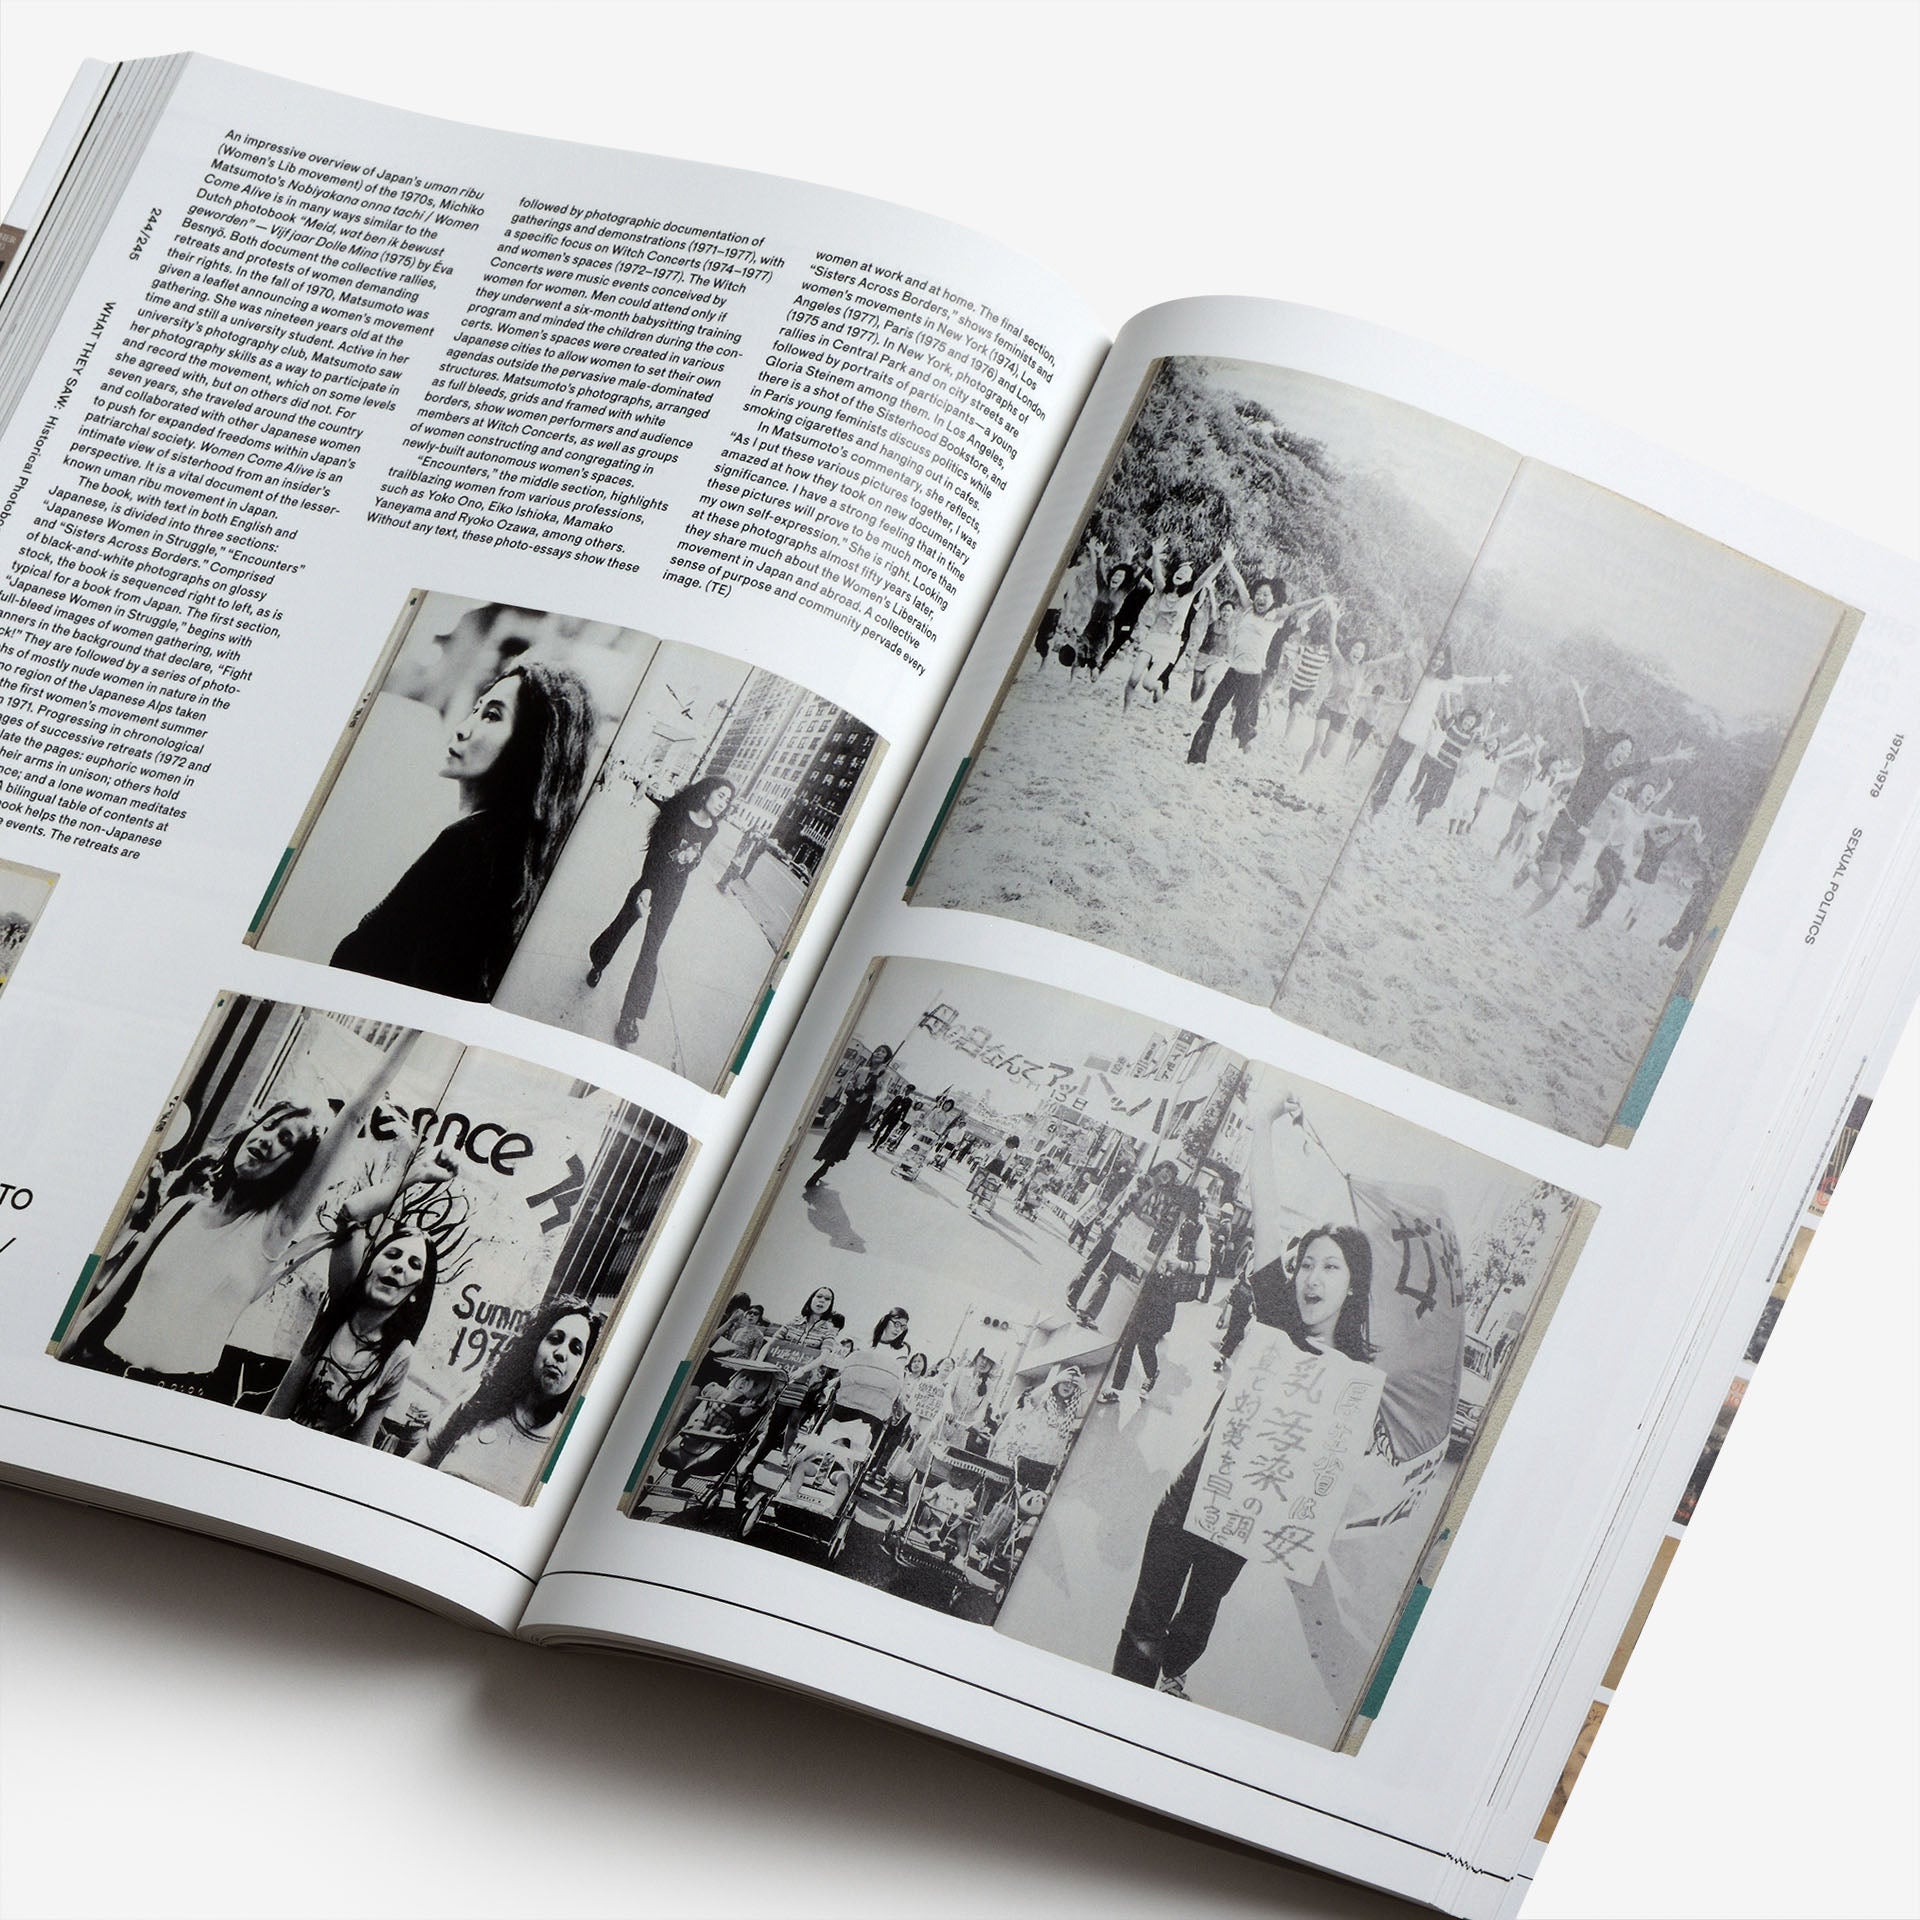 What They Saw: Historical Photobooks By Women, 1843-1999